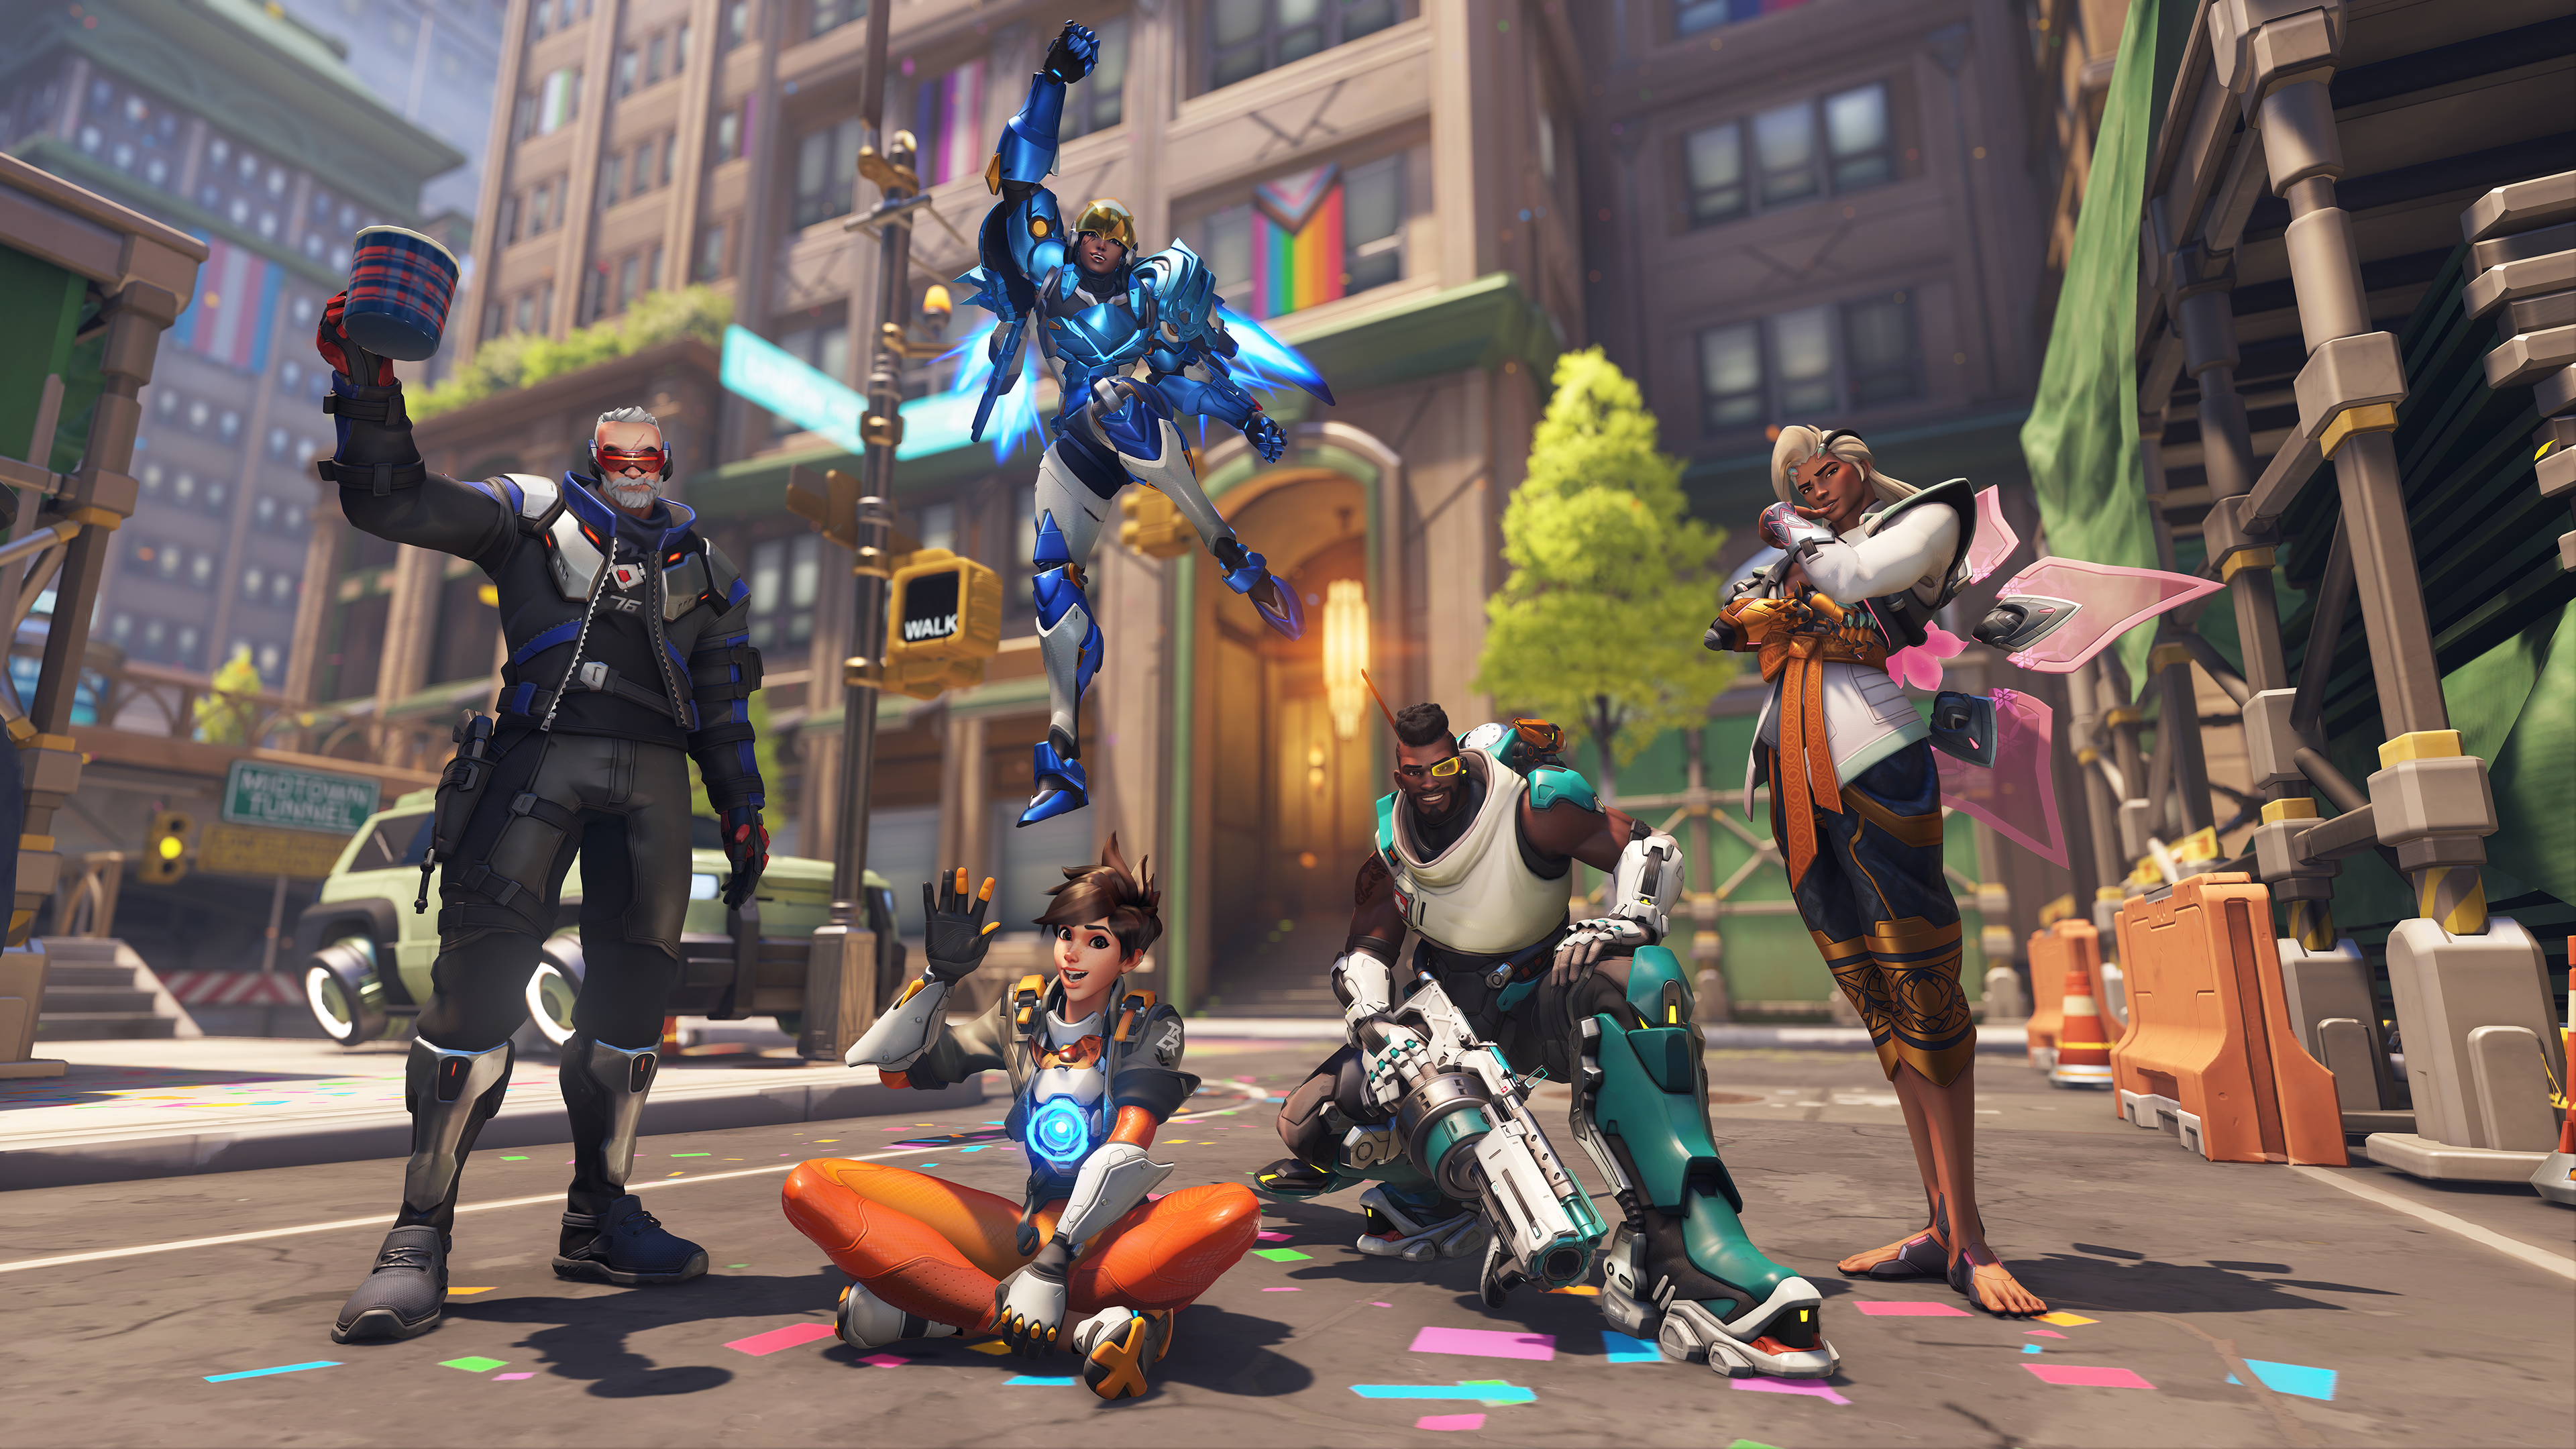 Overwatch's current roster of LGBTQ+ heroes celebrate Pride Month on the streets of New York in Overwatch 2 (2022), Blizzard entertainment